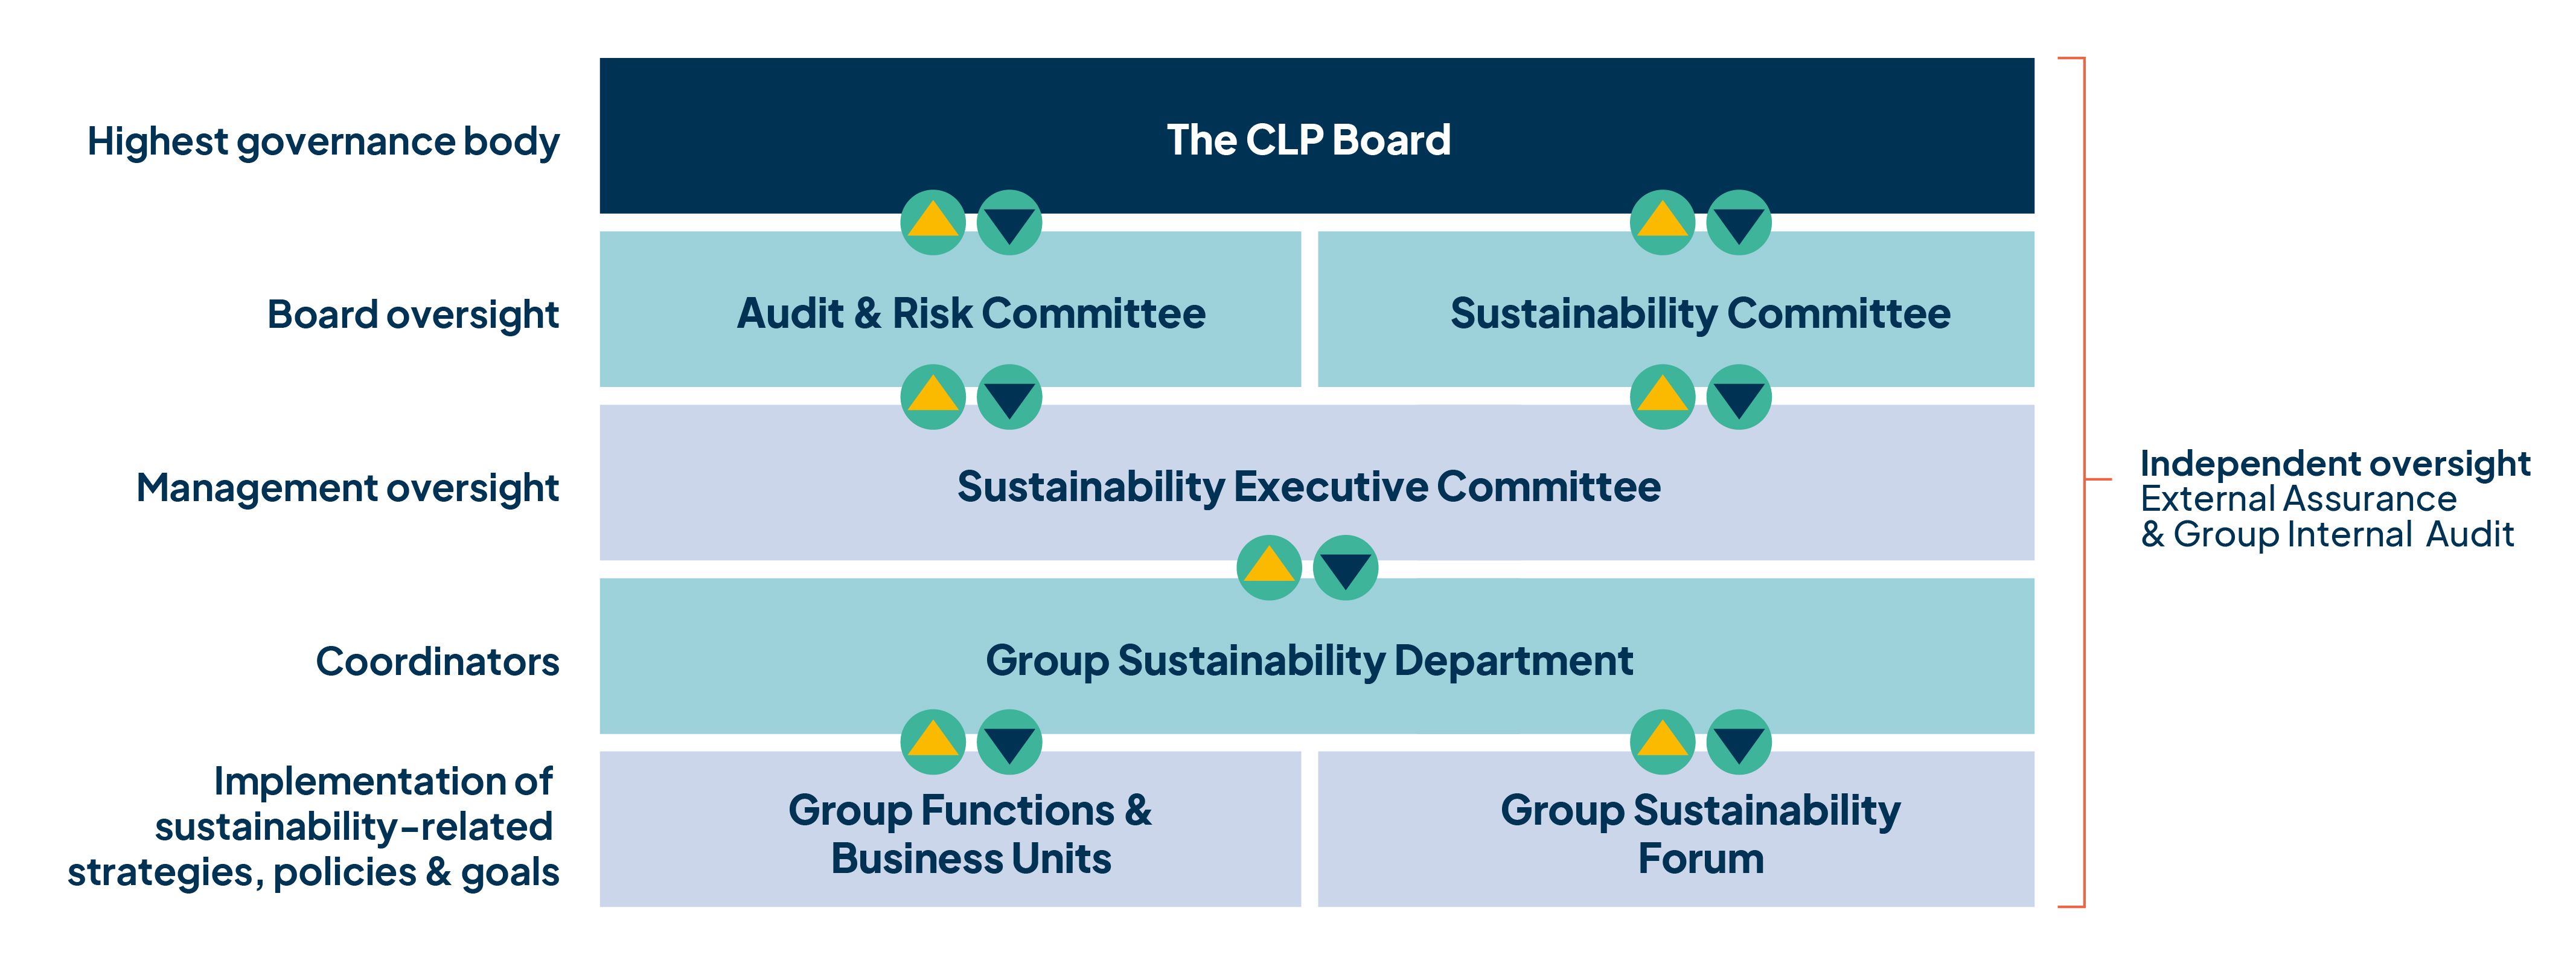 CLP-Group_Governance-Structure_1.jpg